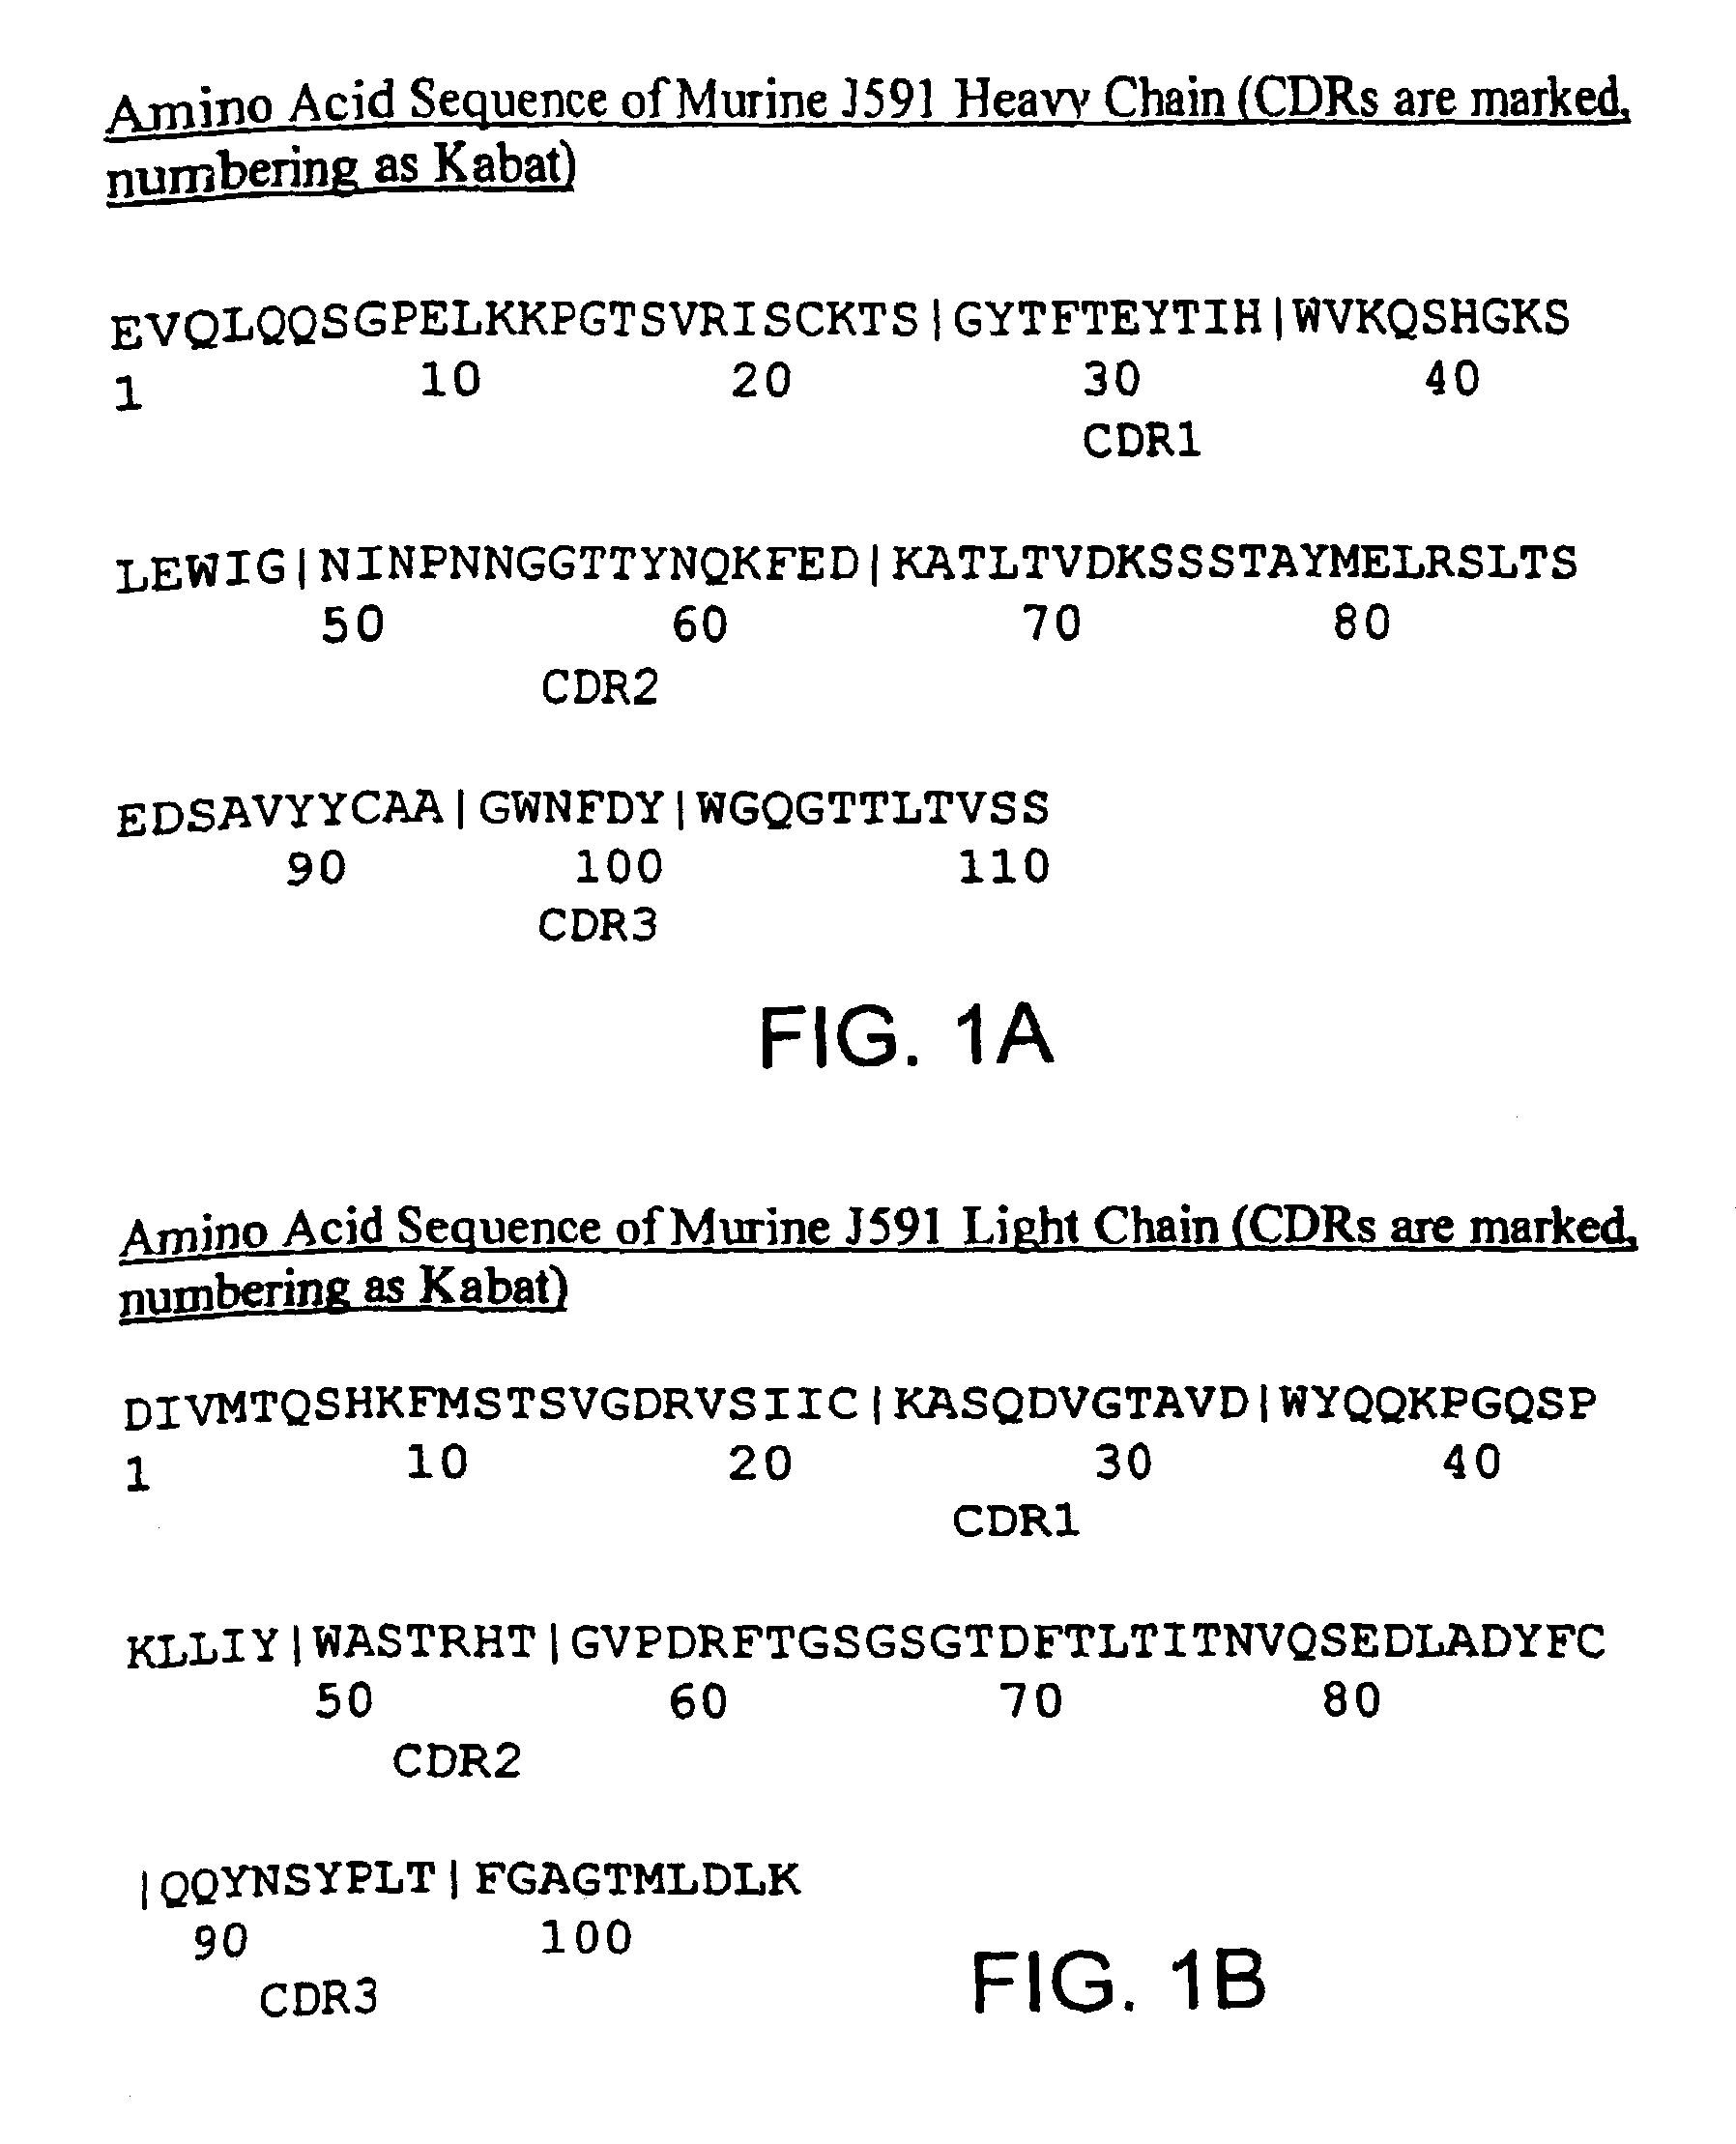 Methods of treating prostate cancer with anti-prostate specific membrane antigen antibodies